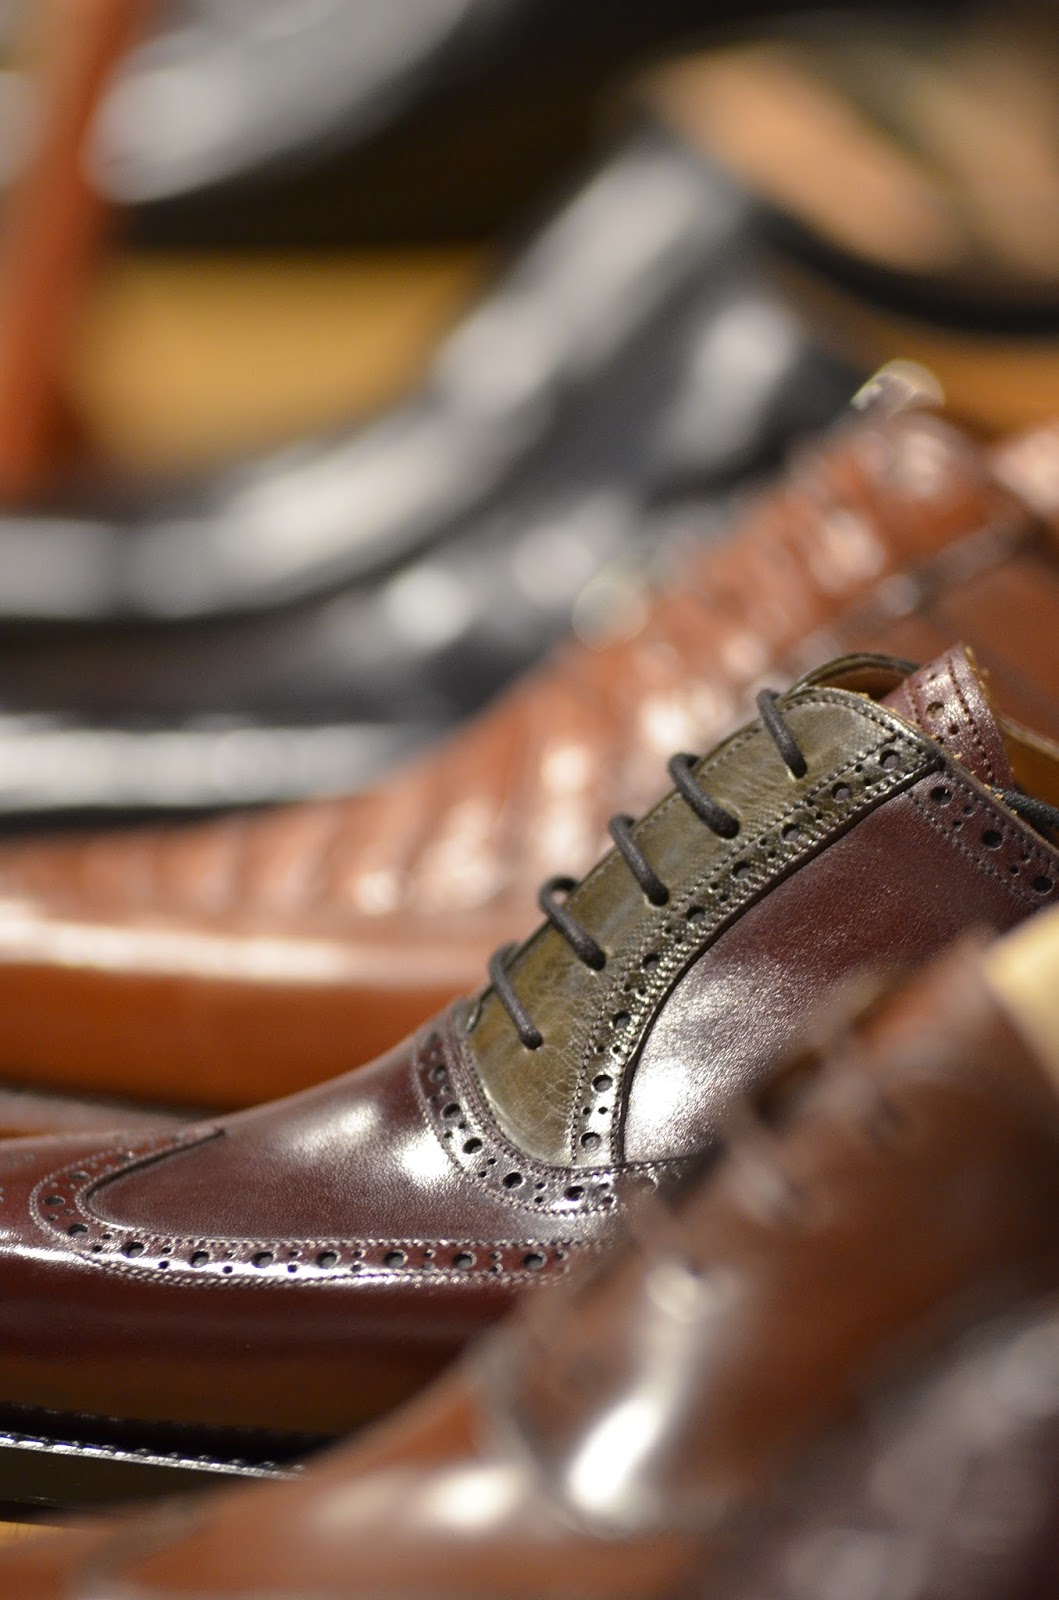 The Shoe AristoCat: Visiting shoemakers in Budapest - Vass Shoes - part ...